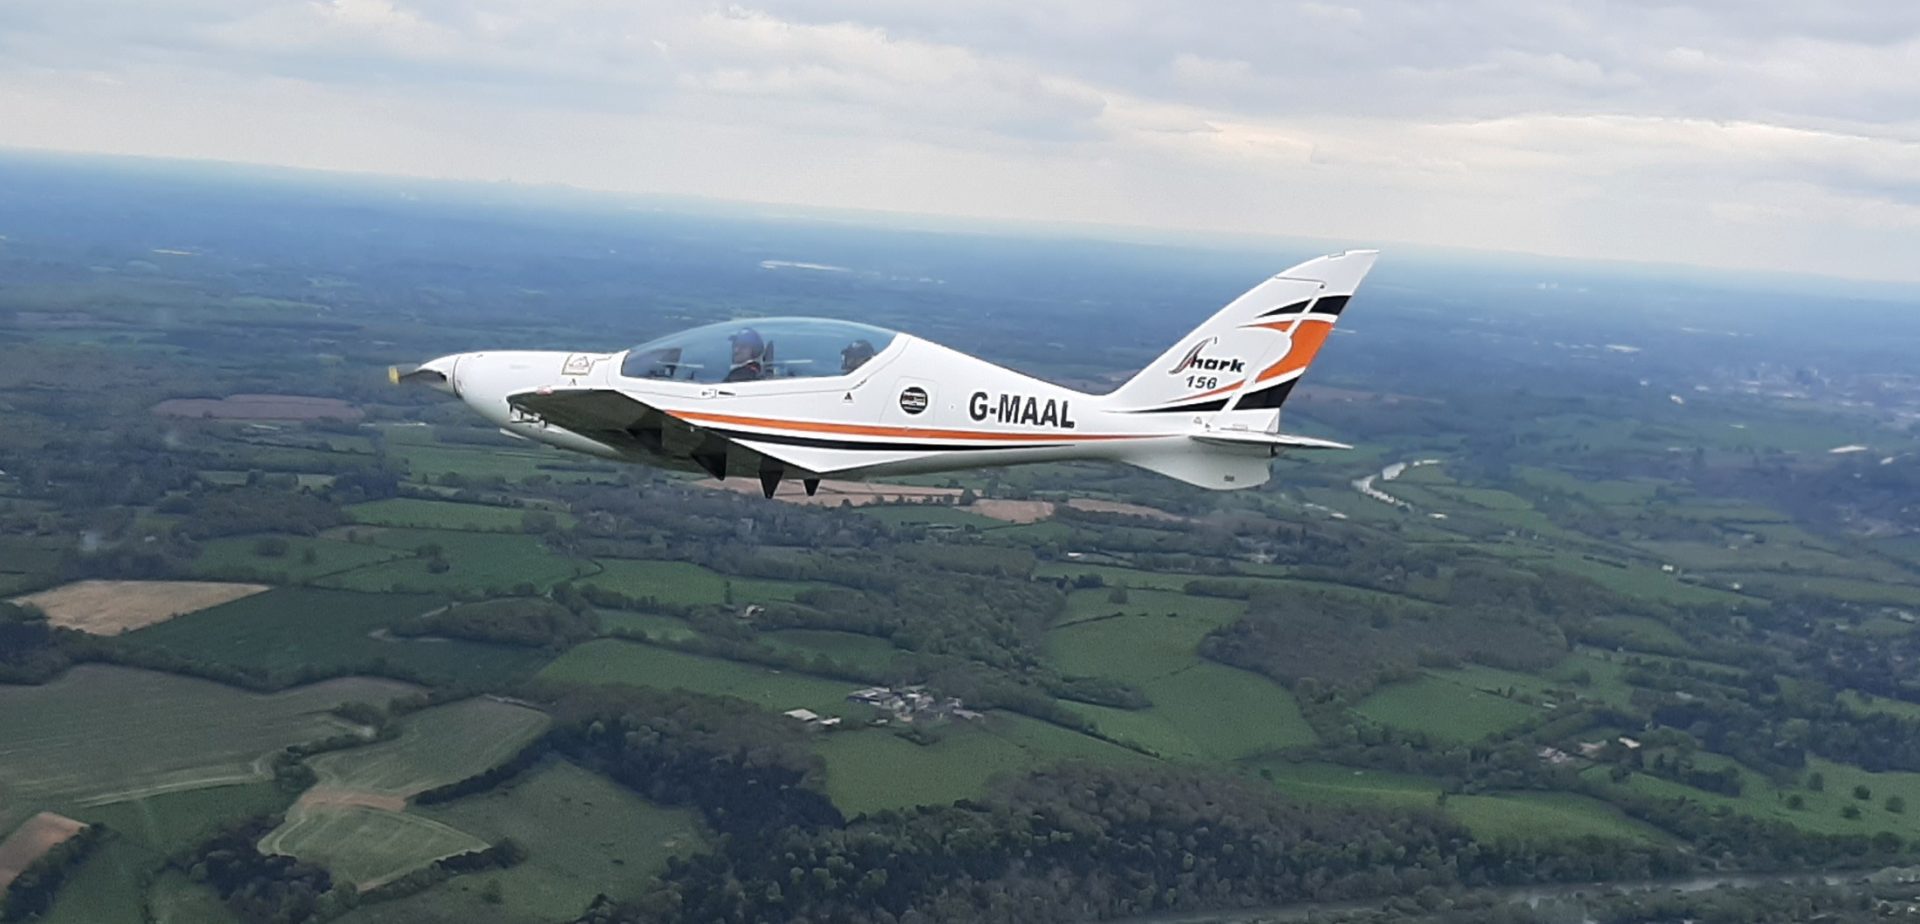 G-MAAL on the way to the Popham Trade Fair